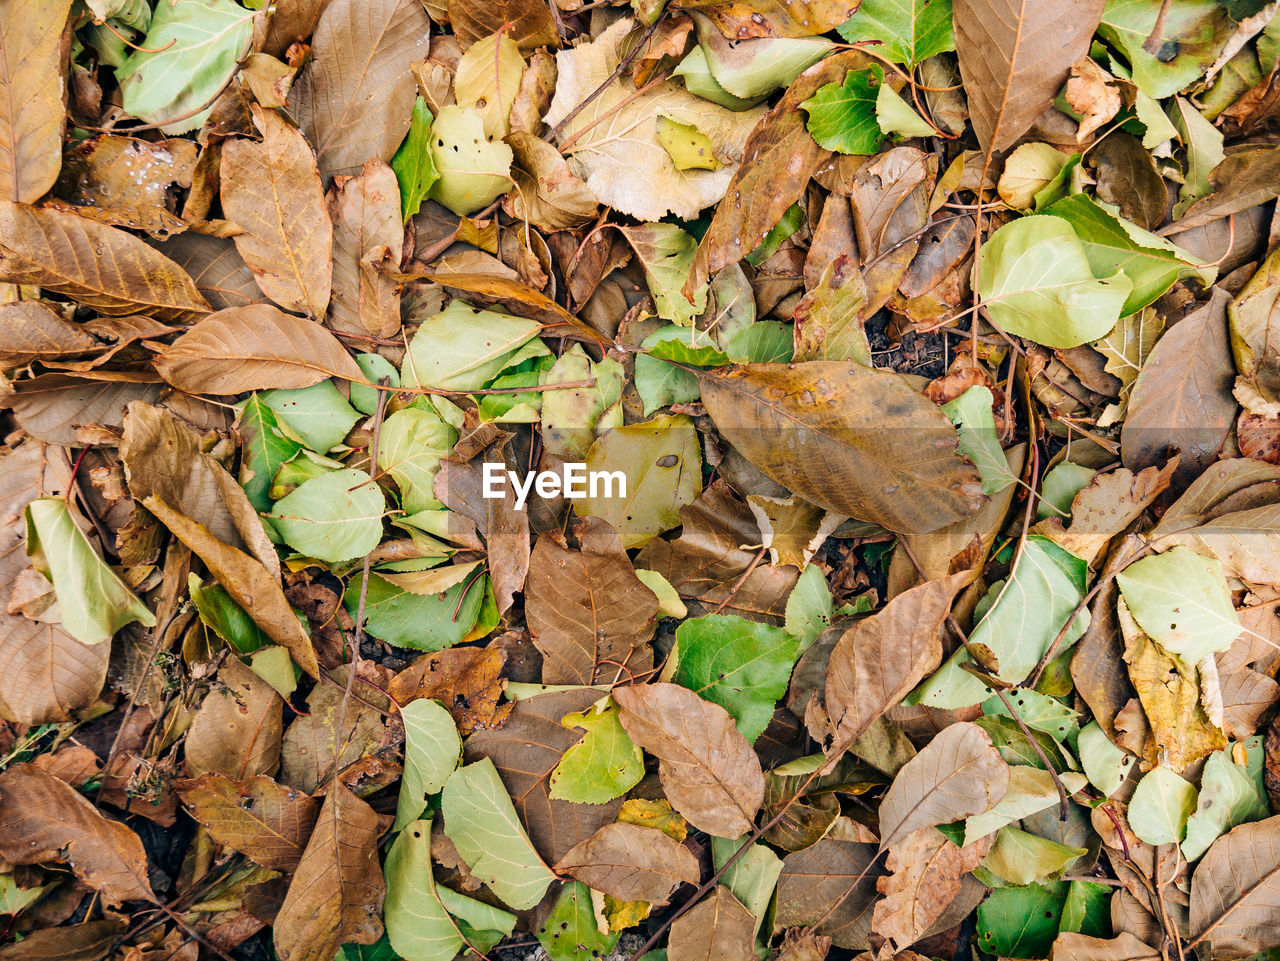 HIGH ANGLE VIEW OF DRIED LEAVES ON FALLEN TREE